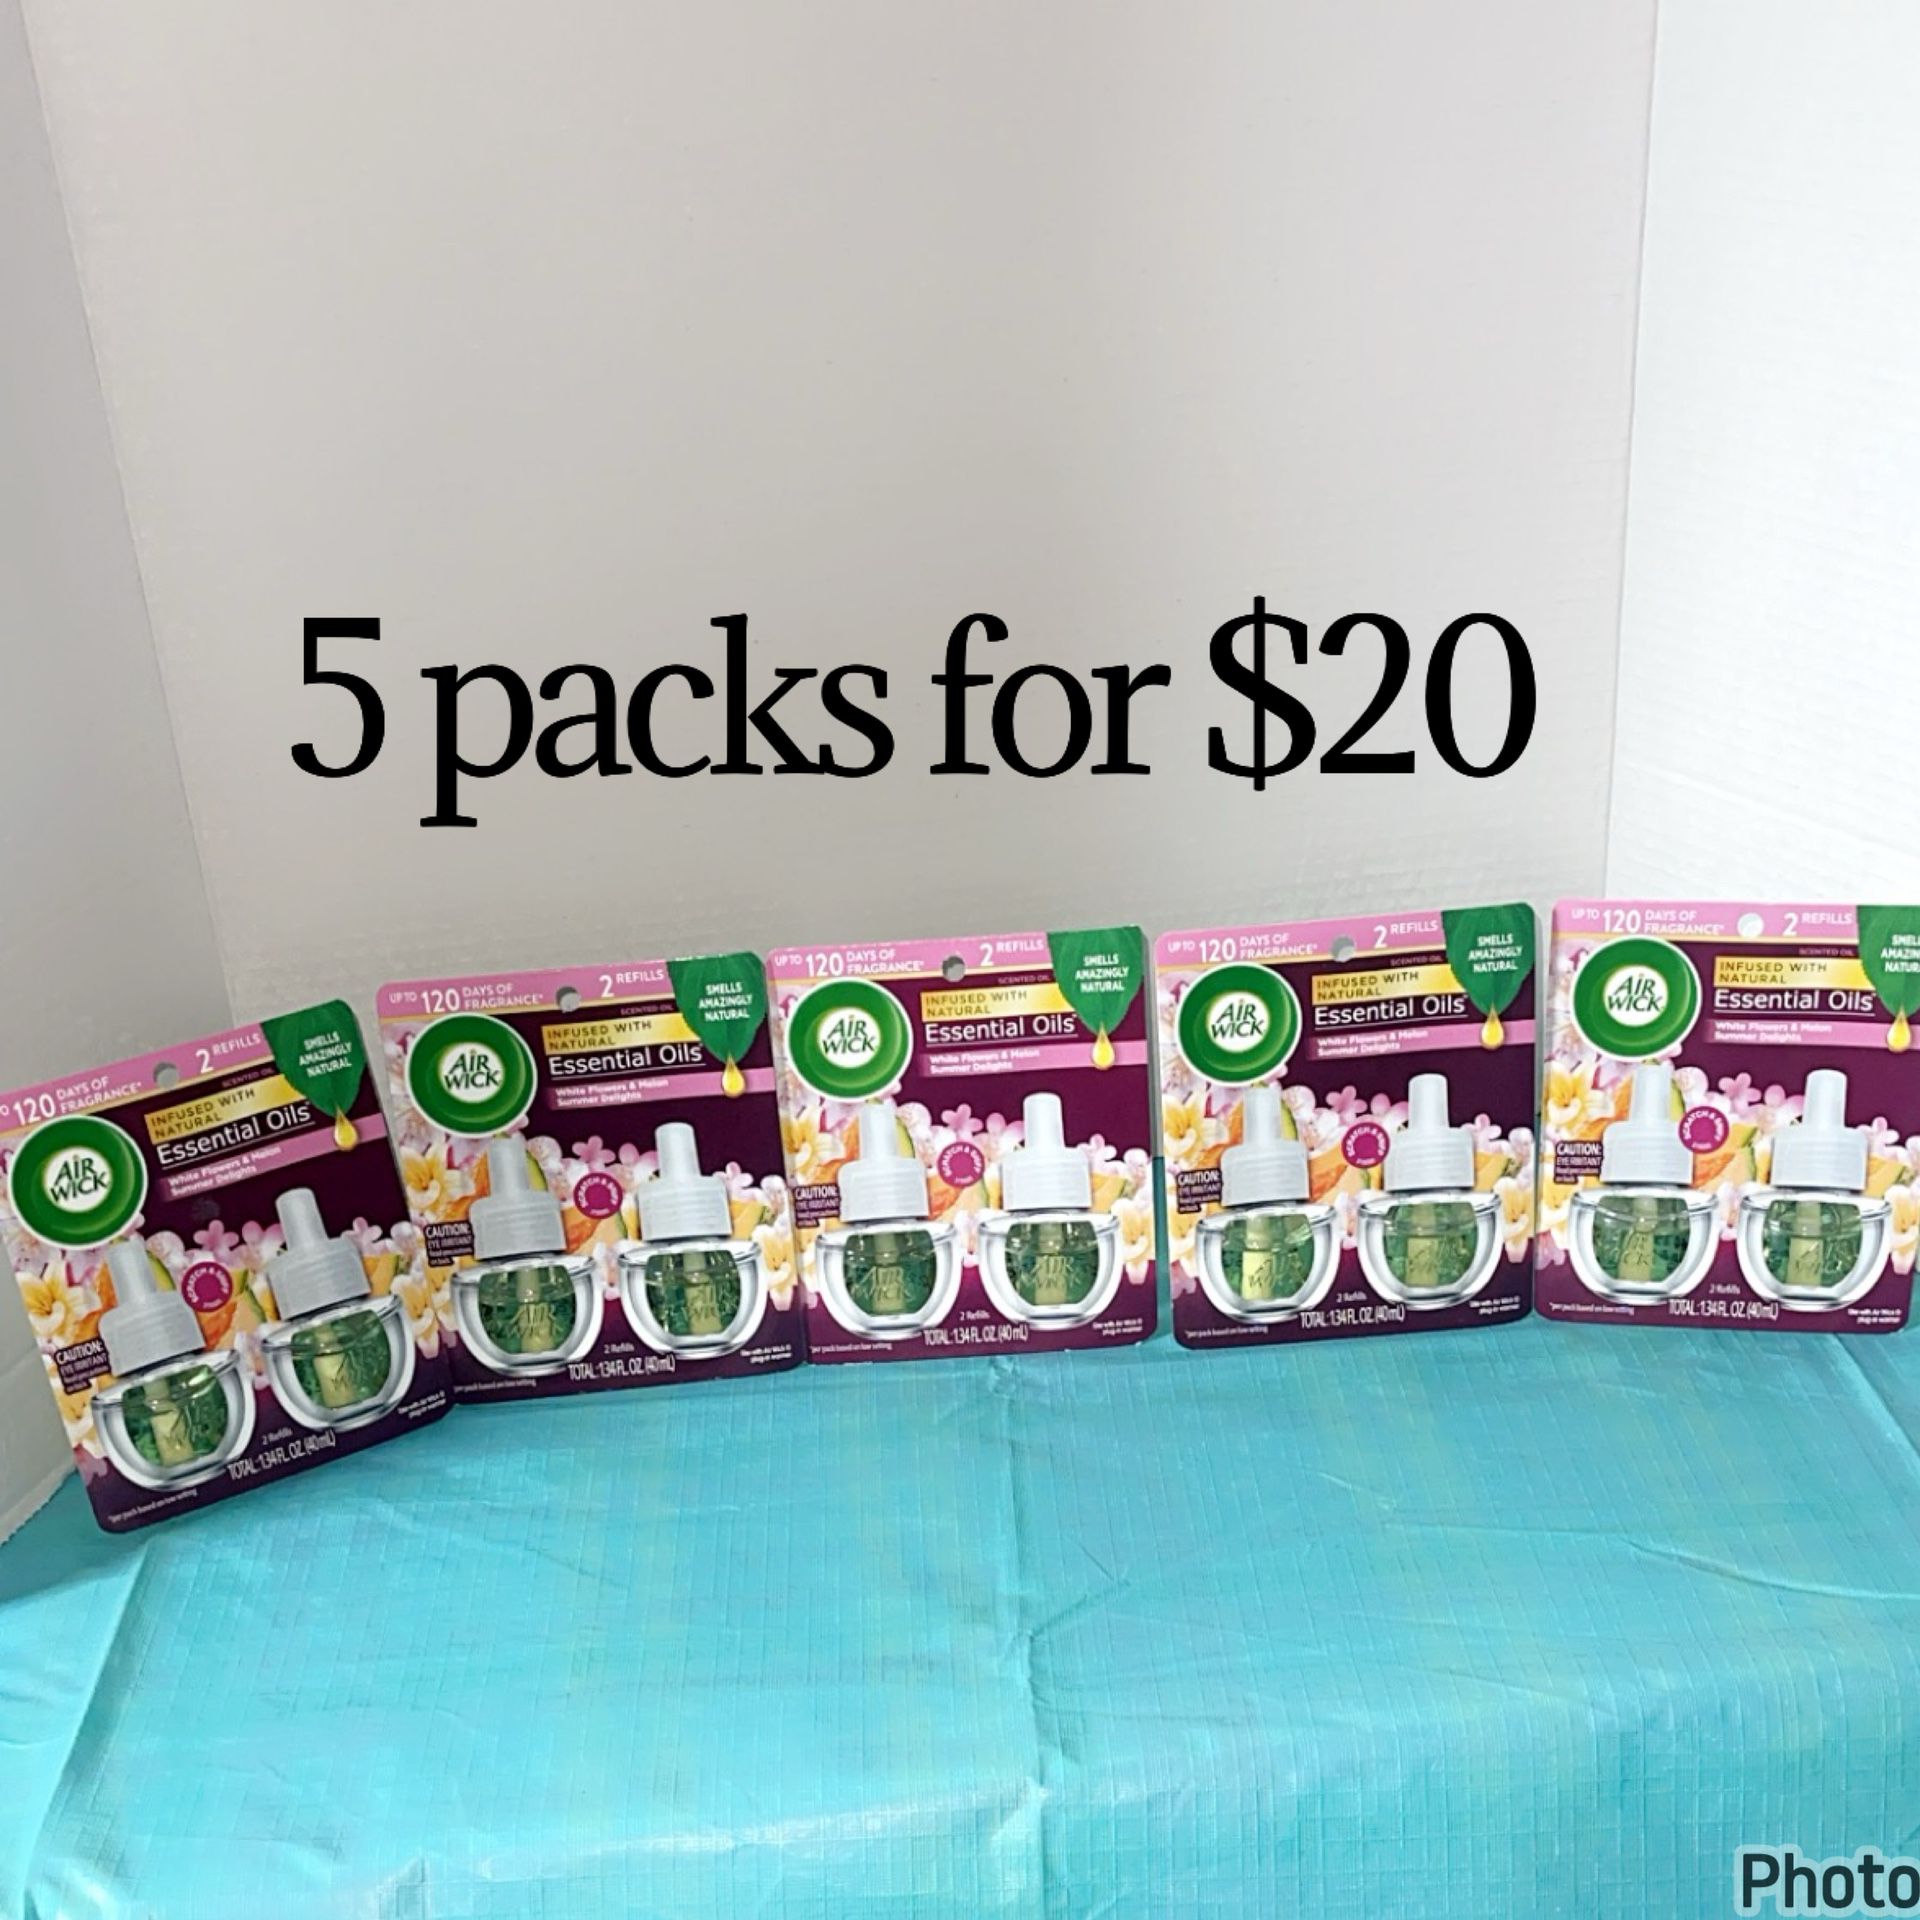 Air wick 5 packs for $20 